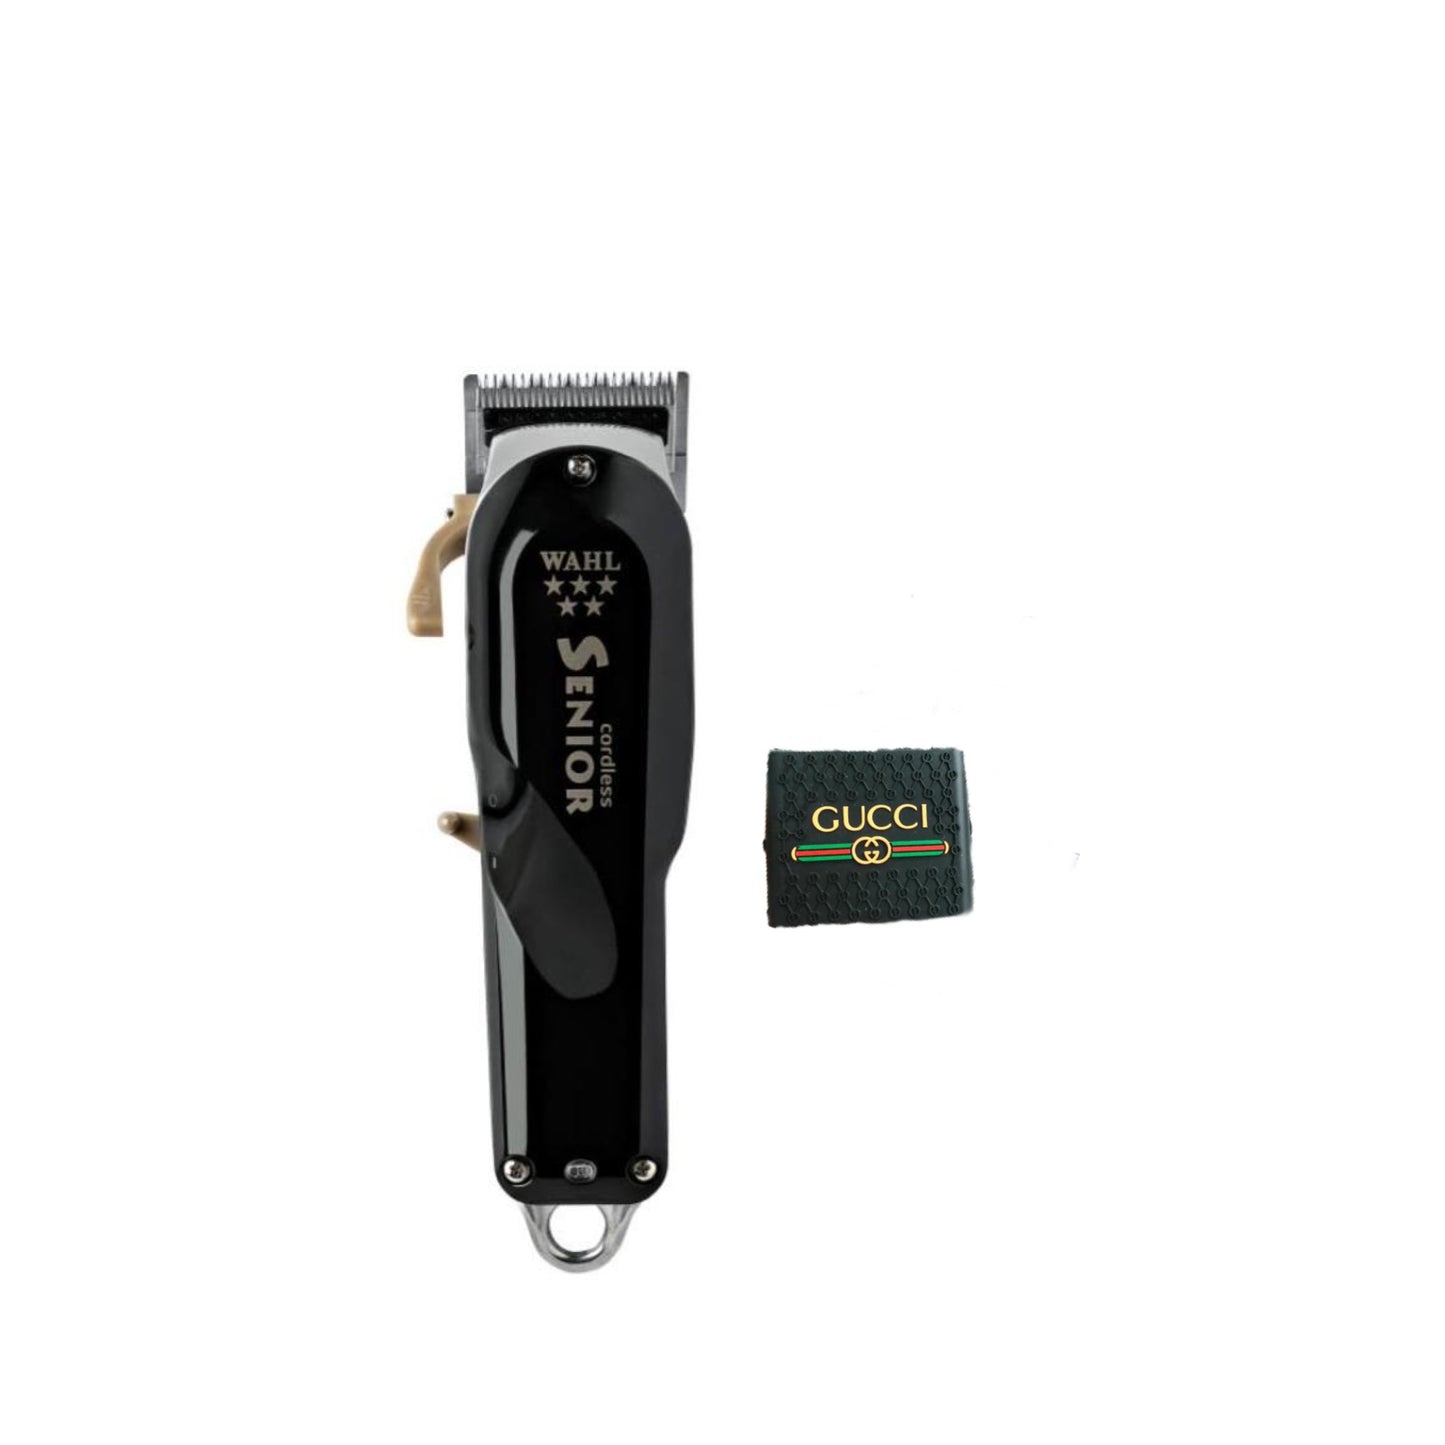 Wahl Cordless Senior Clipper with clipper grip